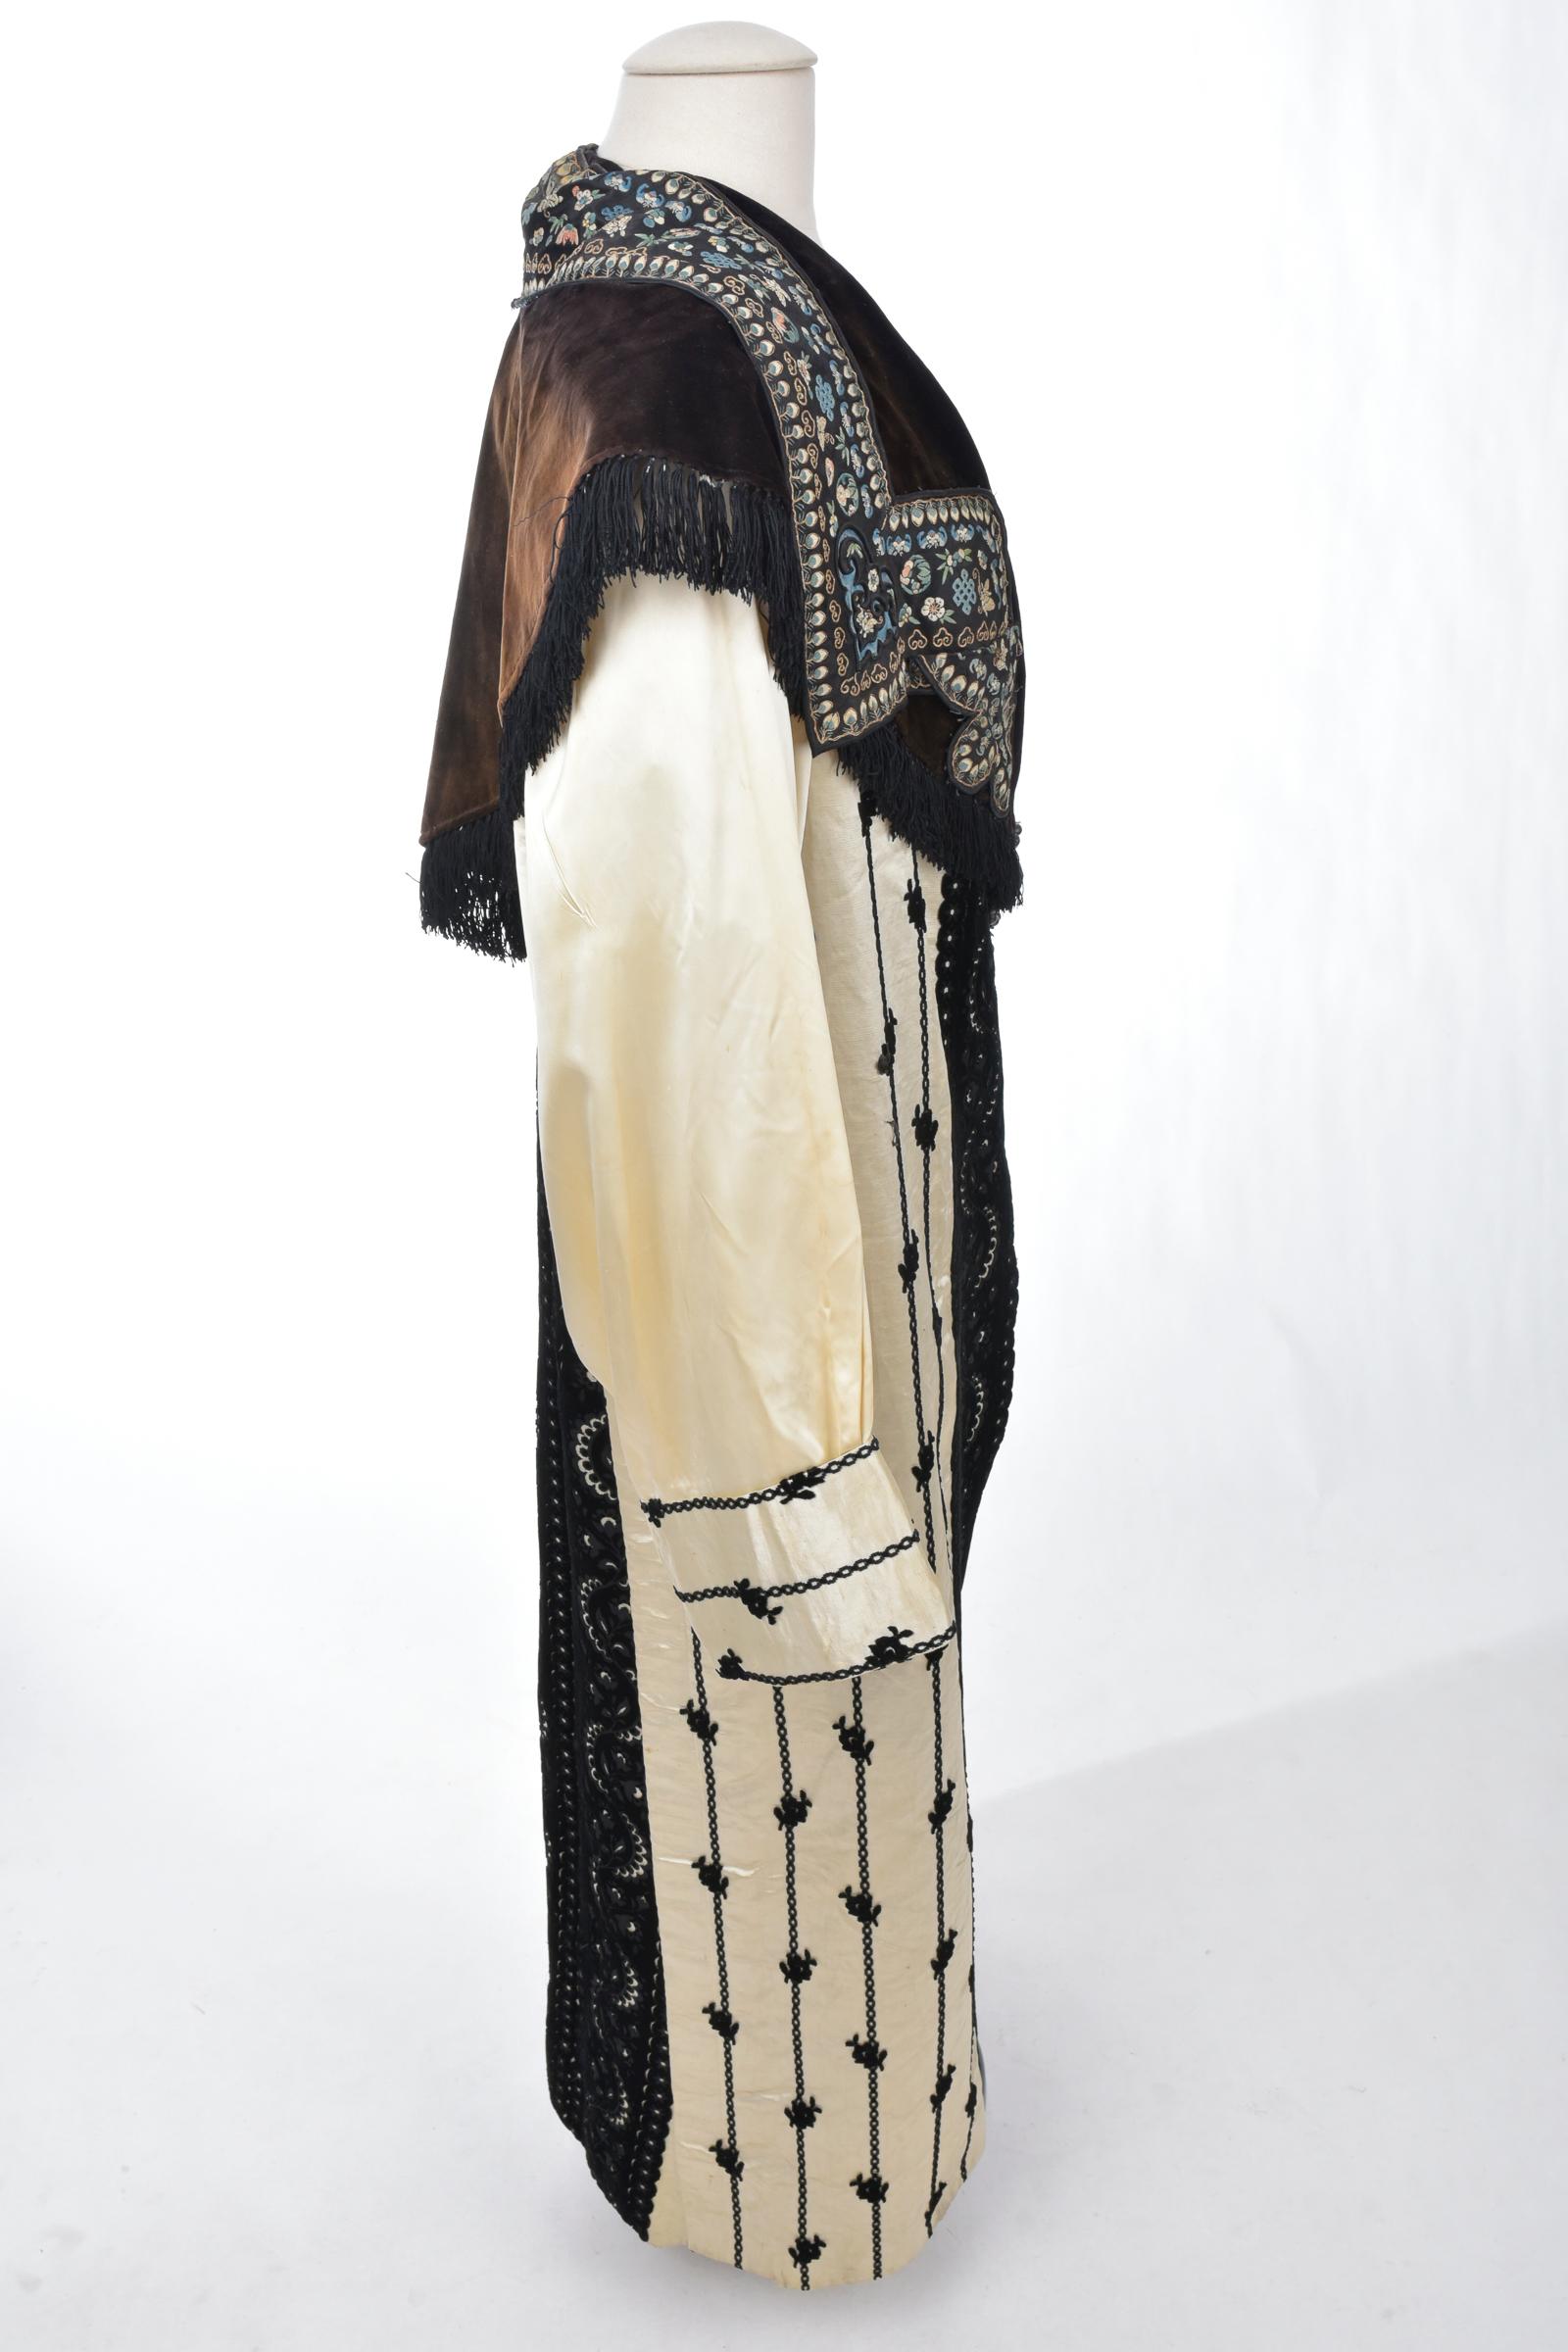 Evening coat in velvet brocaded satin and Qing embroidery  - France Circa 1915 7